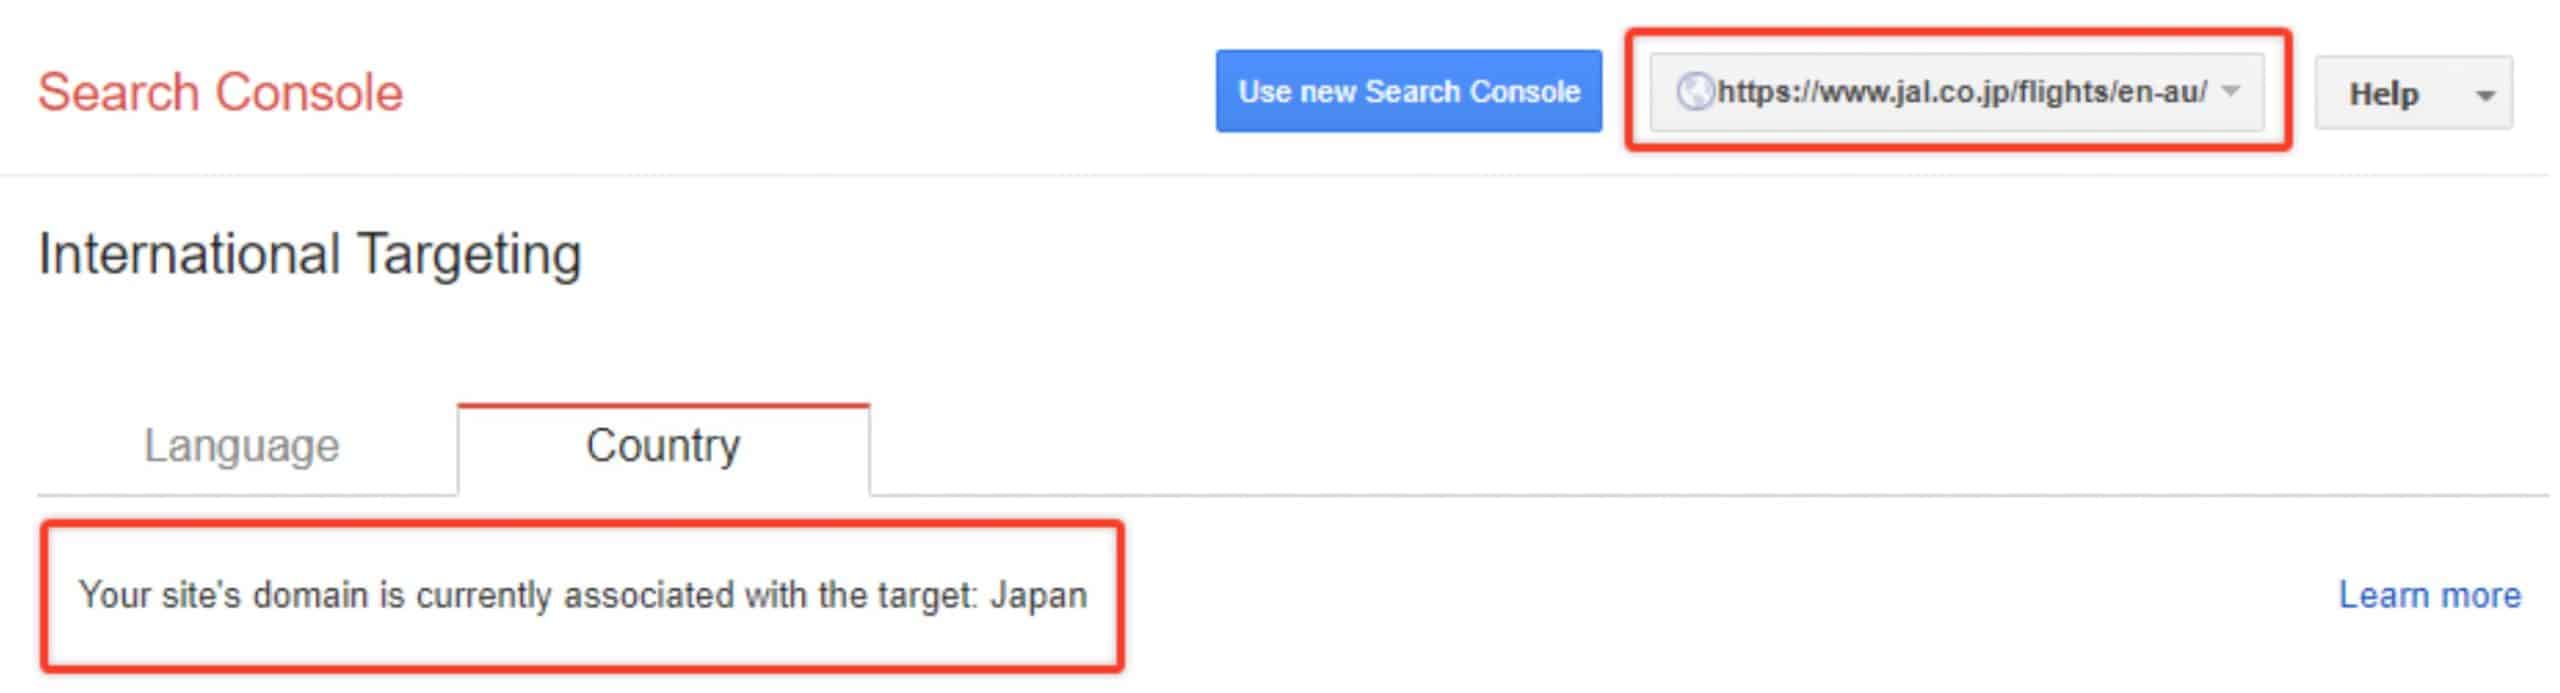 Japan Airlines Google Search Console